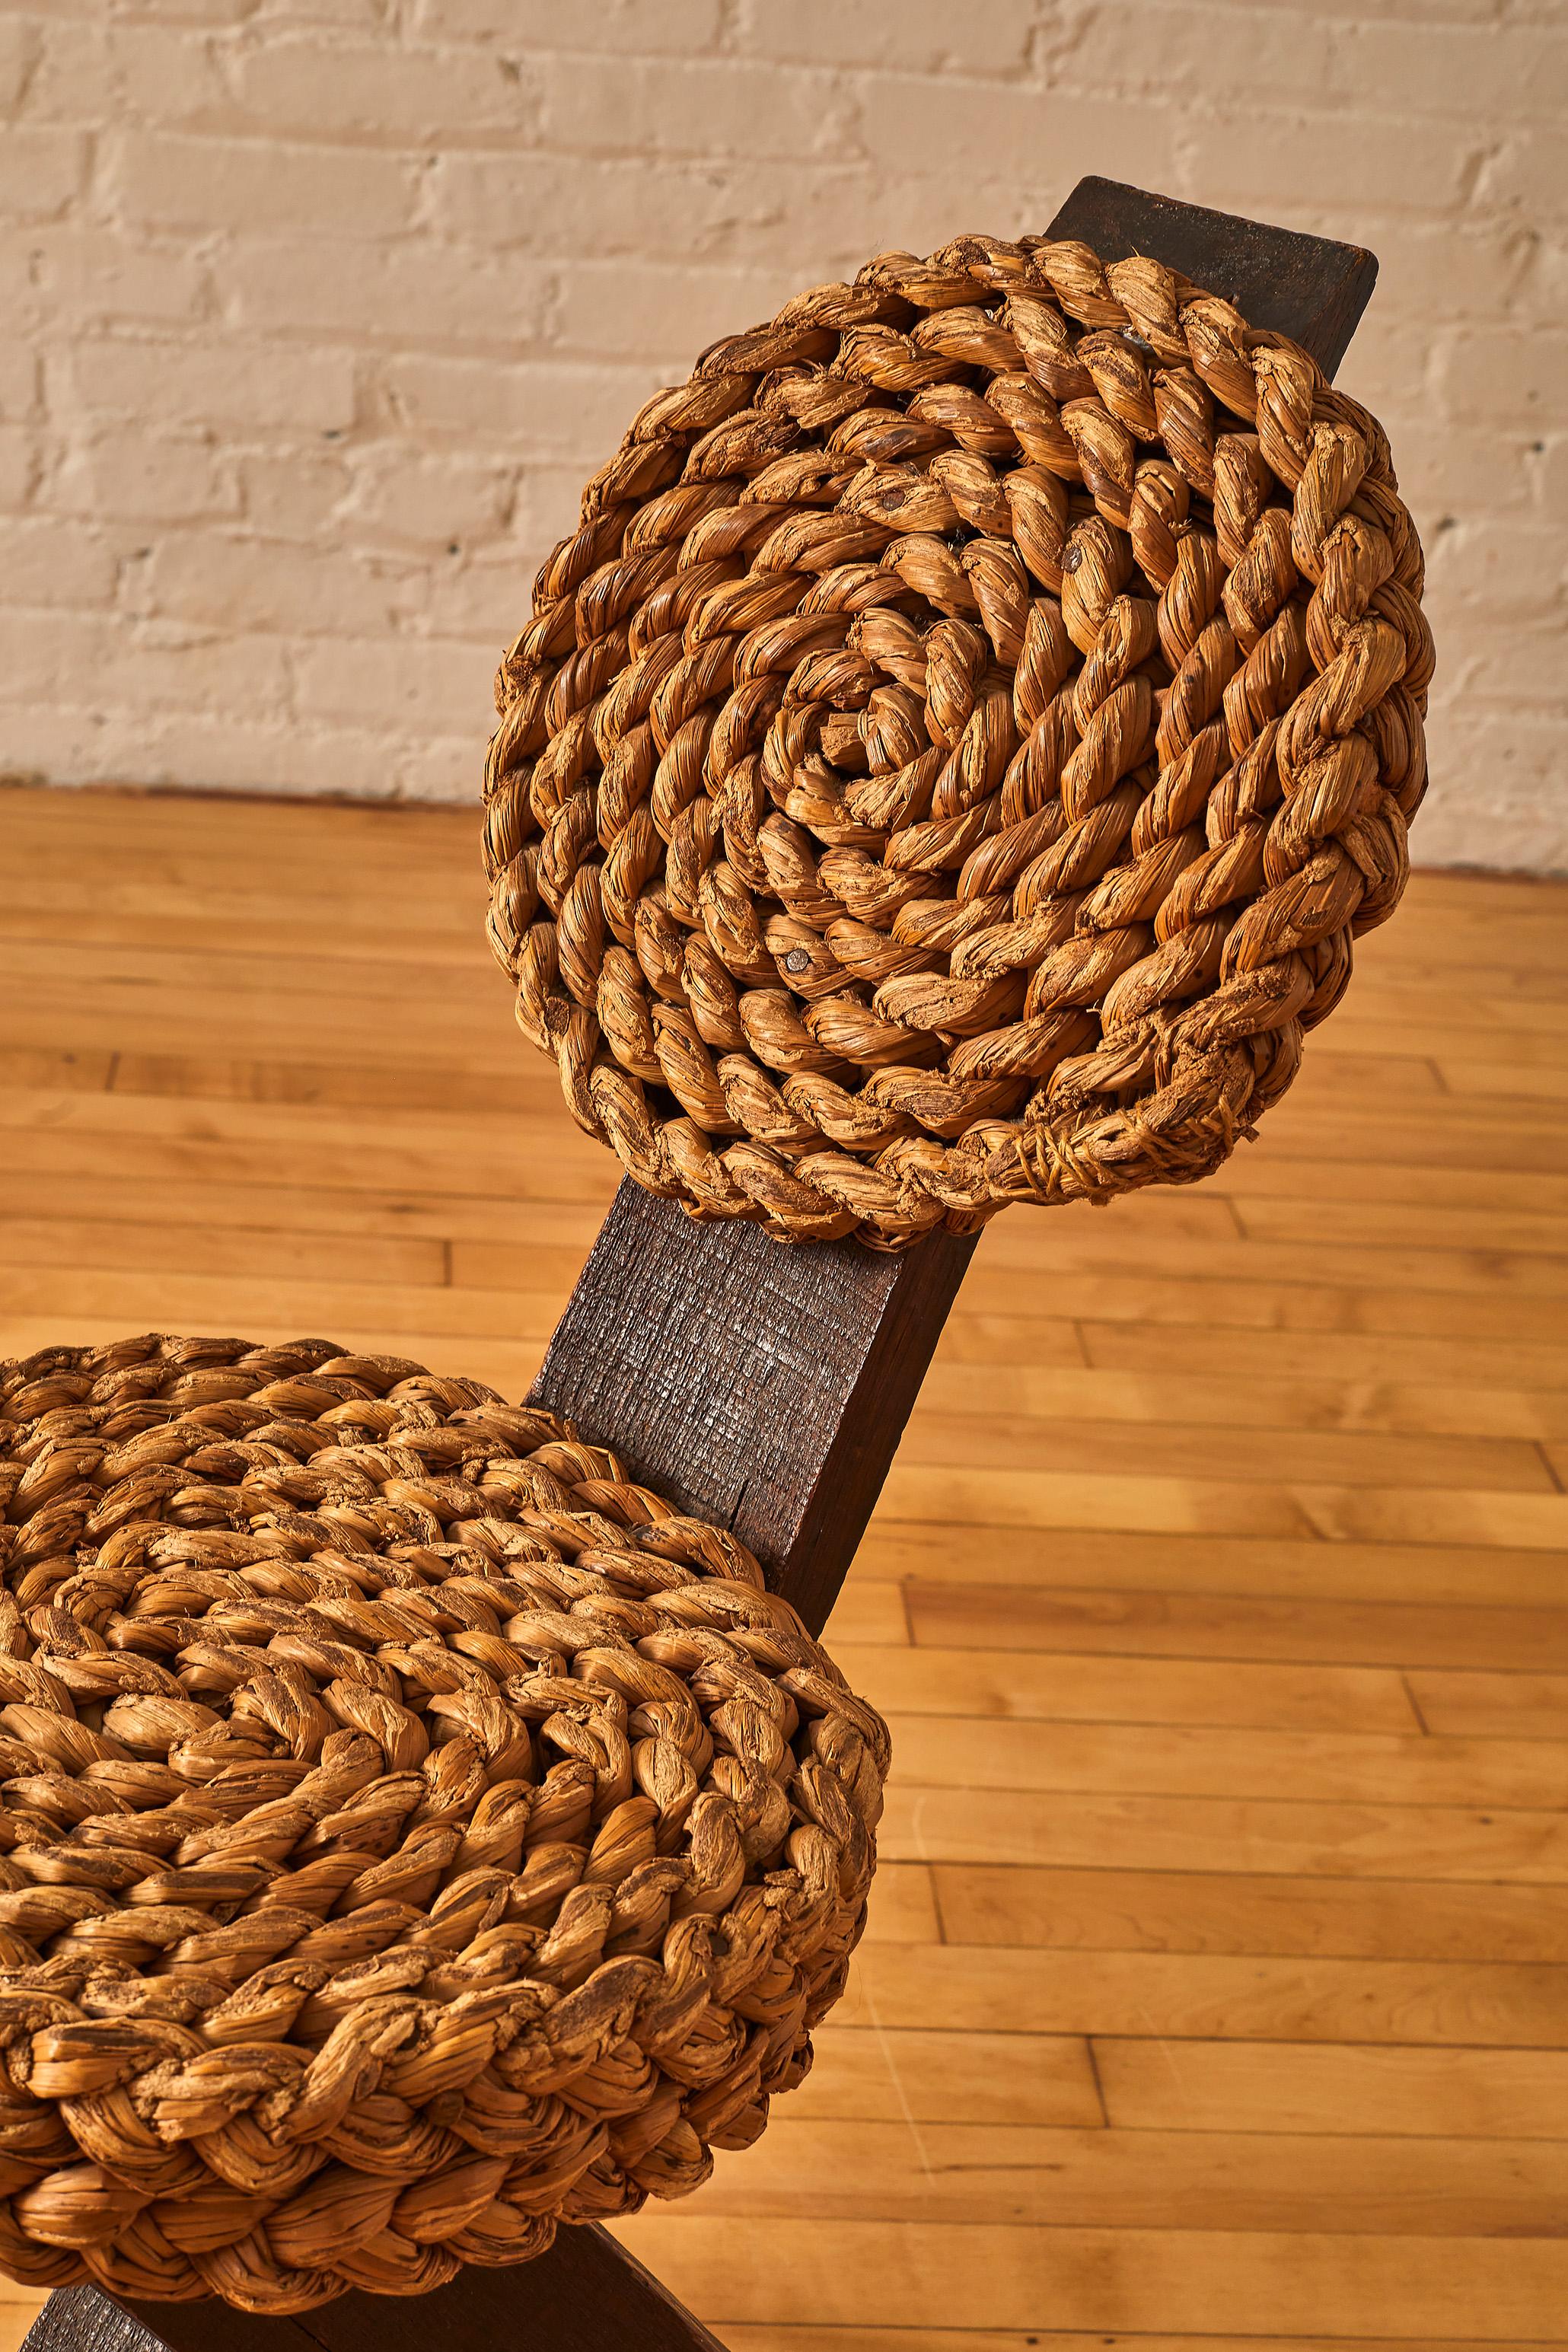 Tripod Rope Chair by Adrien Audoux & Frida Minet 1